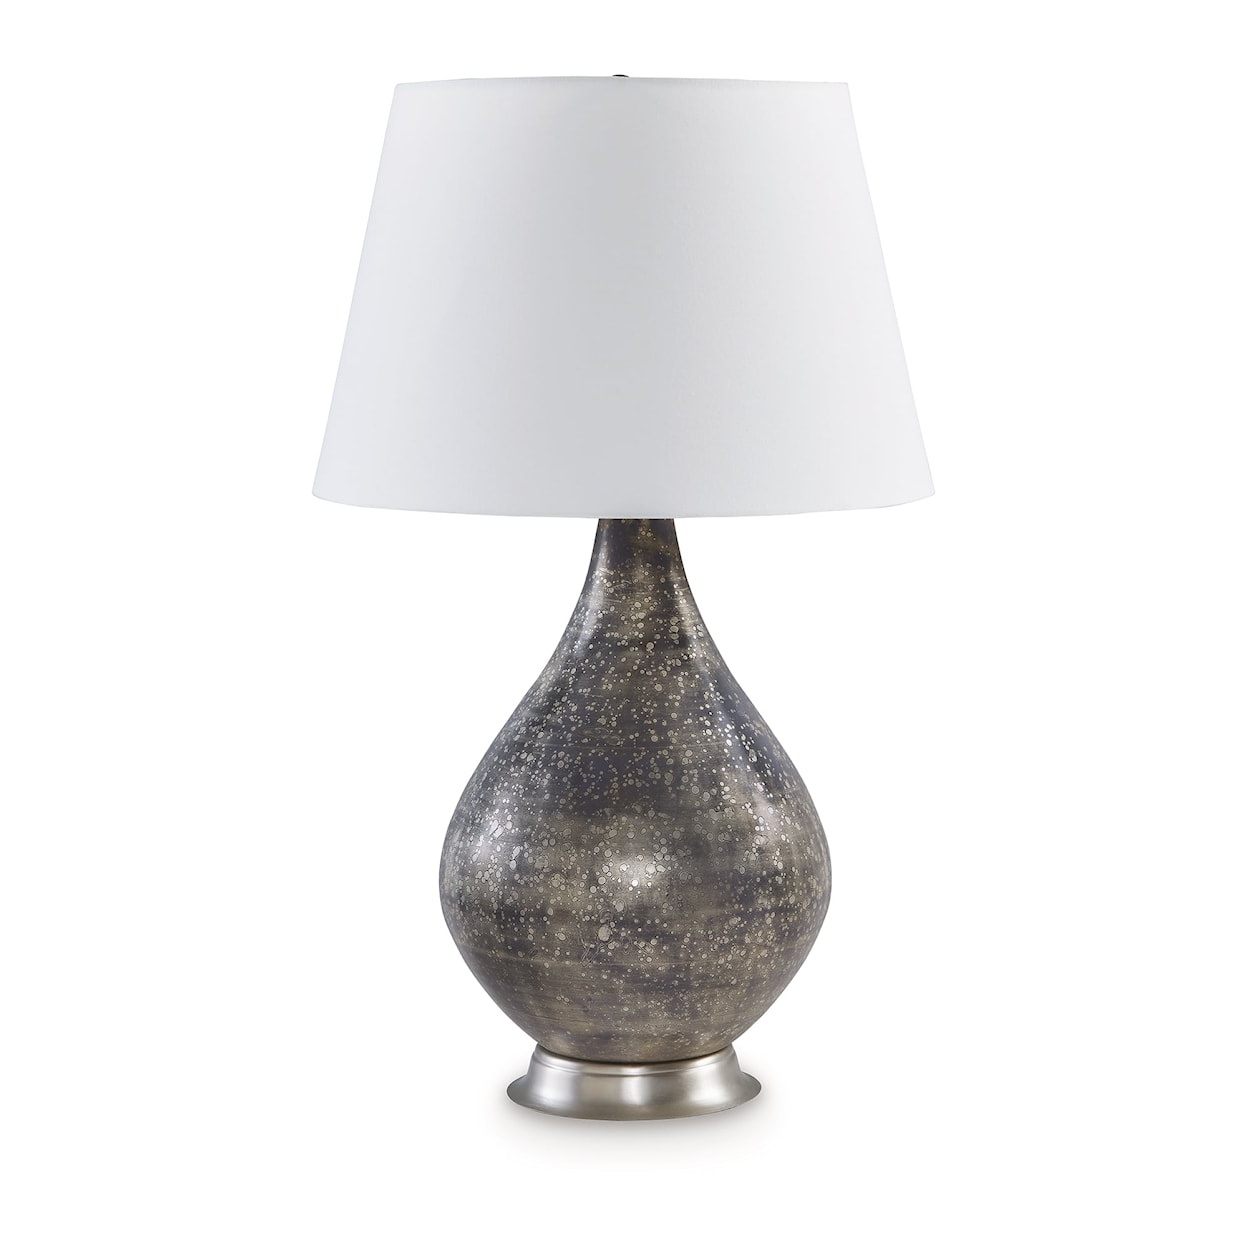 Benchcraft Bluacy Glass Table Lamp